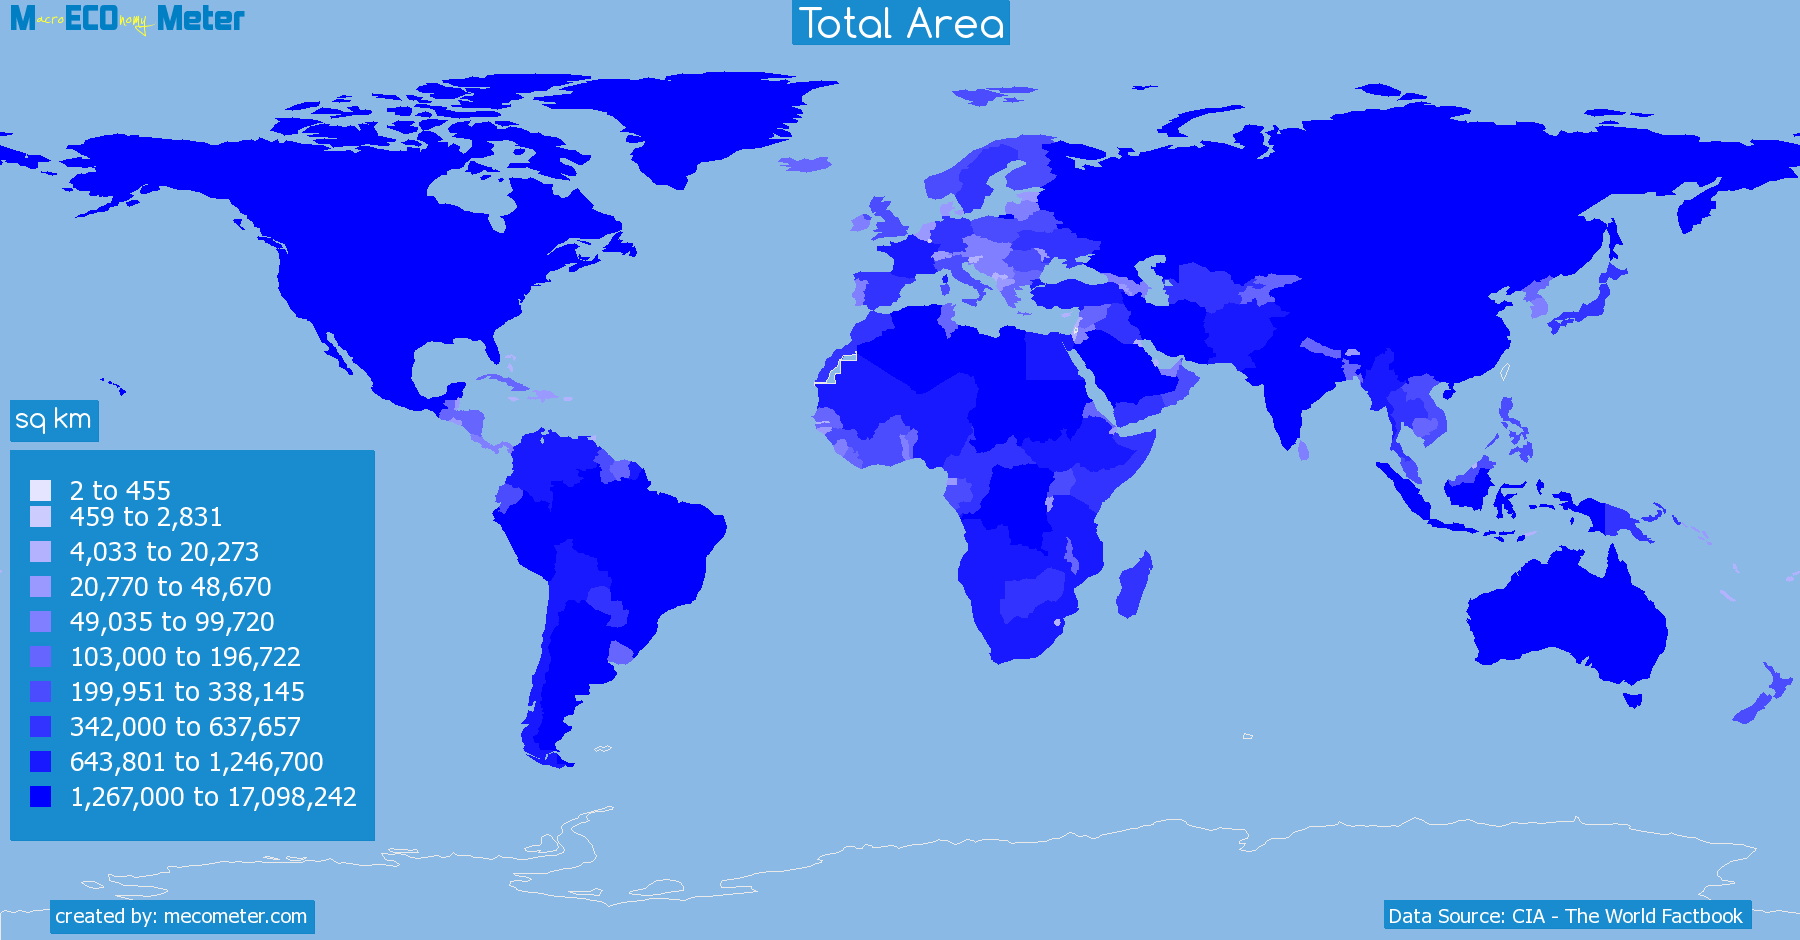 Worldmap of all countries colored to reflect the values of Total Area